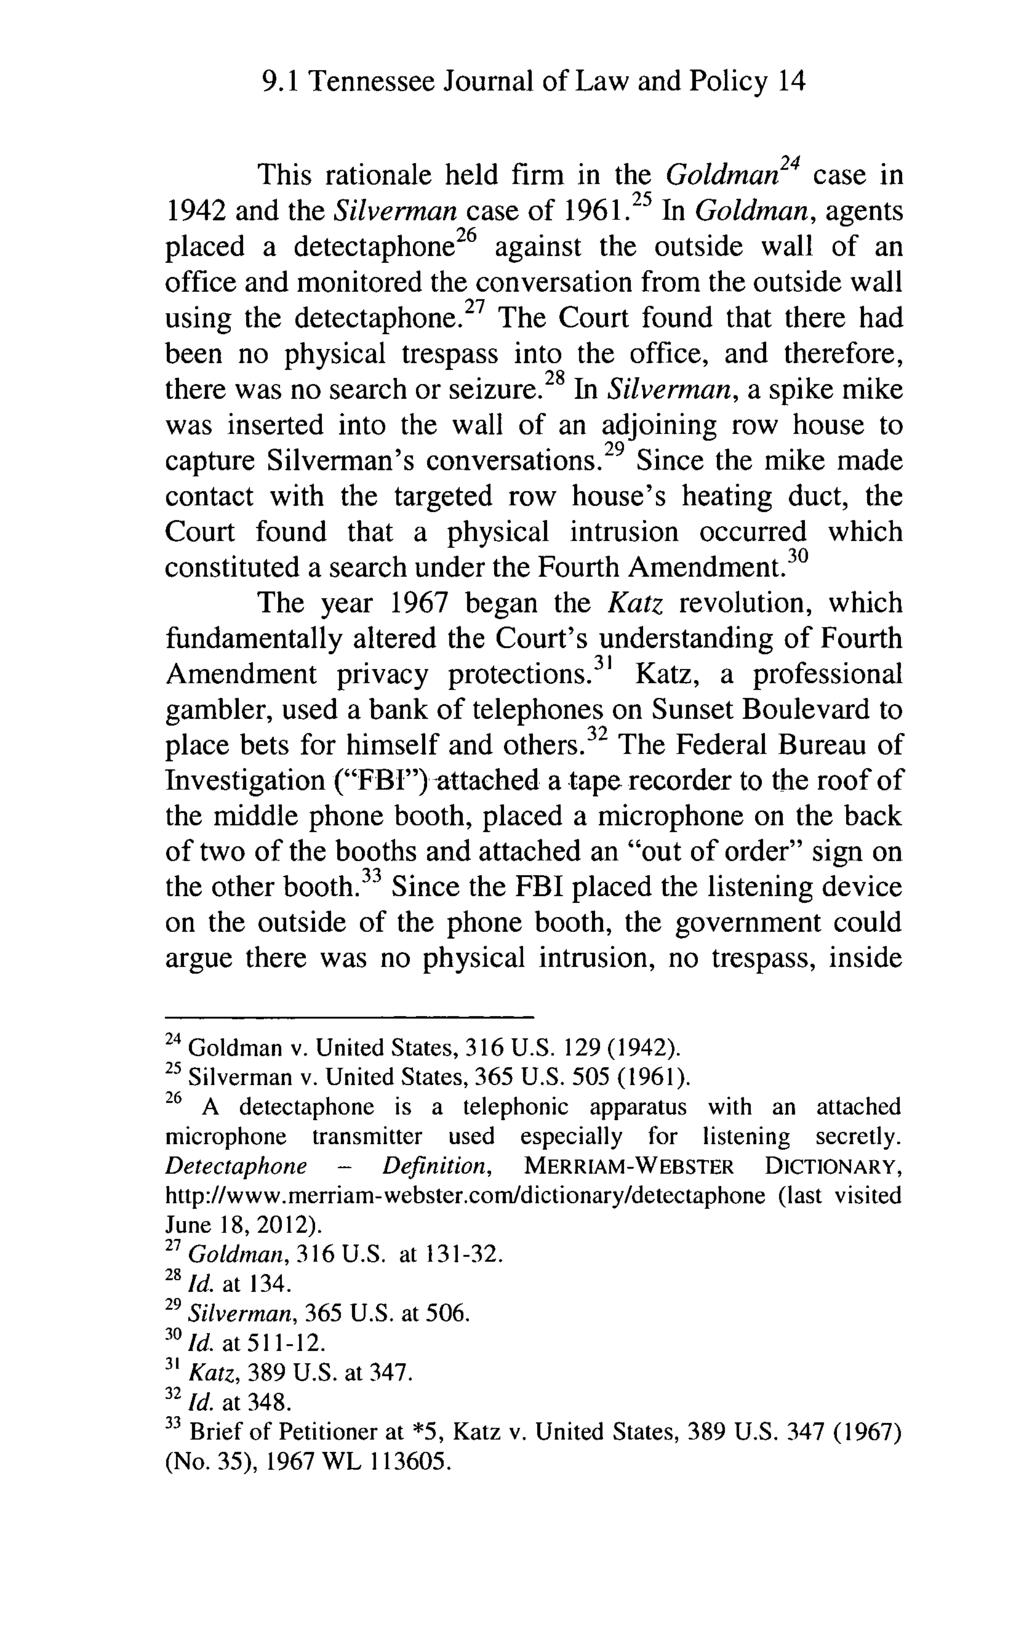 Tennessee Journal of Law and Policy, Vol. 9, Iss. 1 [2013], Art. 3 9.1 Tennessee Journal of Law and Policy 14 This rationale held firm in the Goldman24 case in 1942 and the Silverman case of 1961.